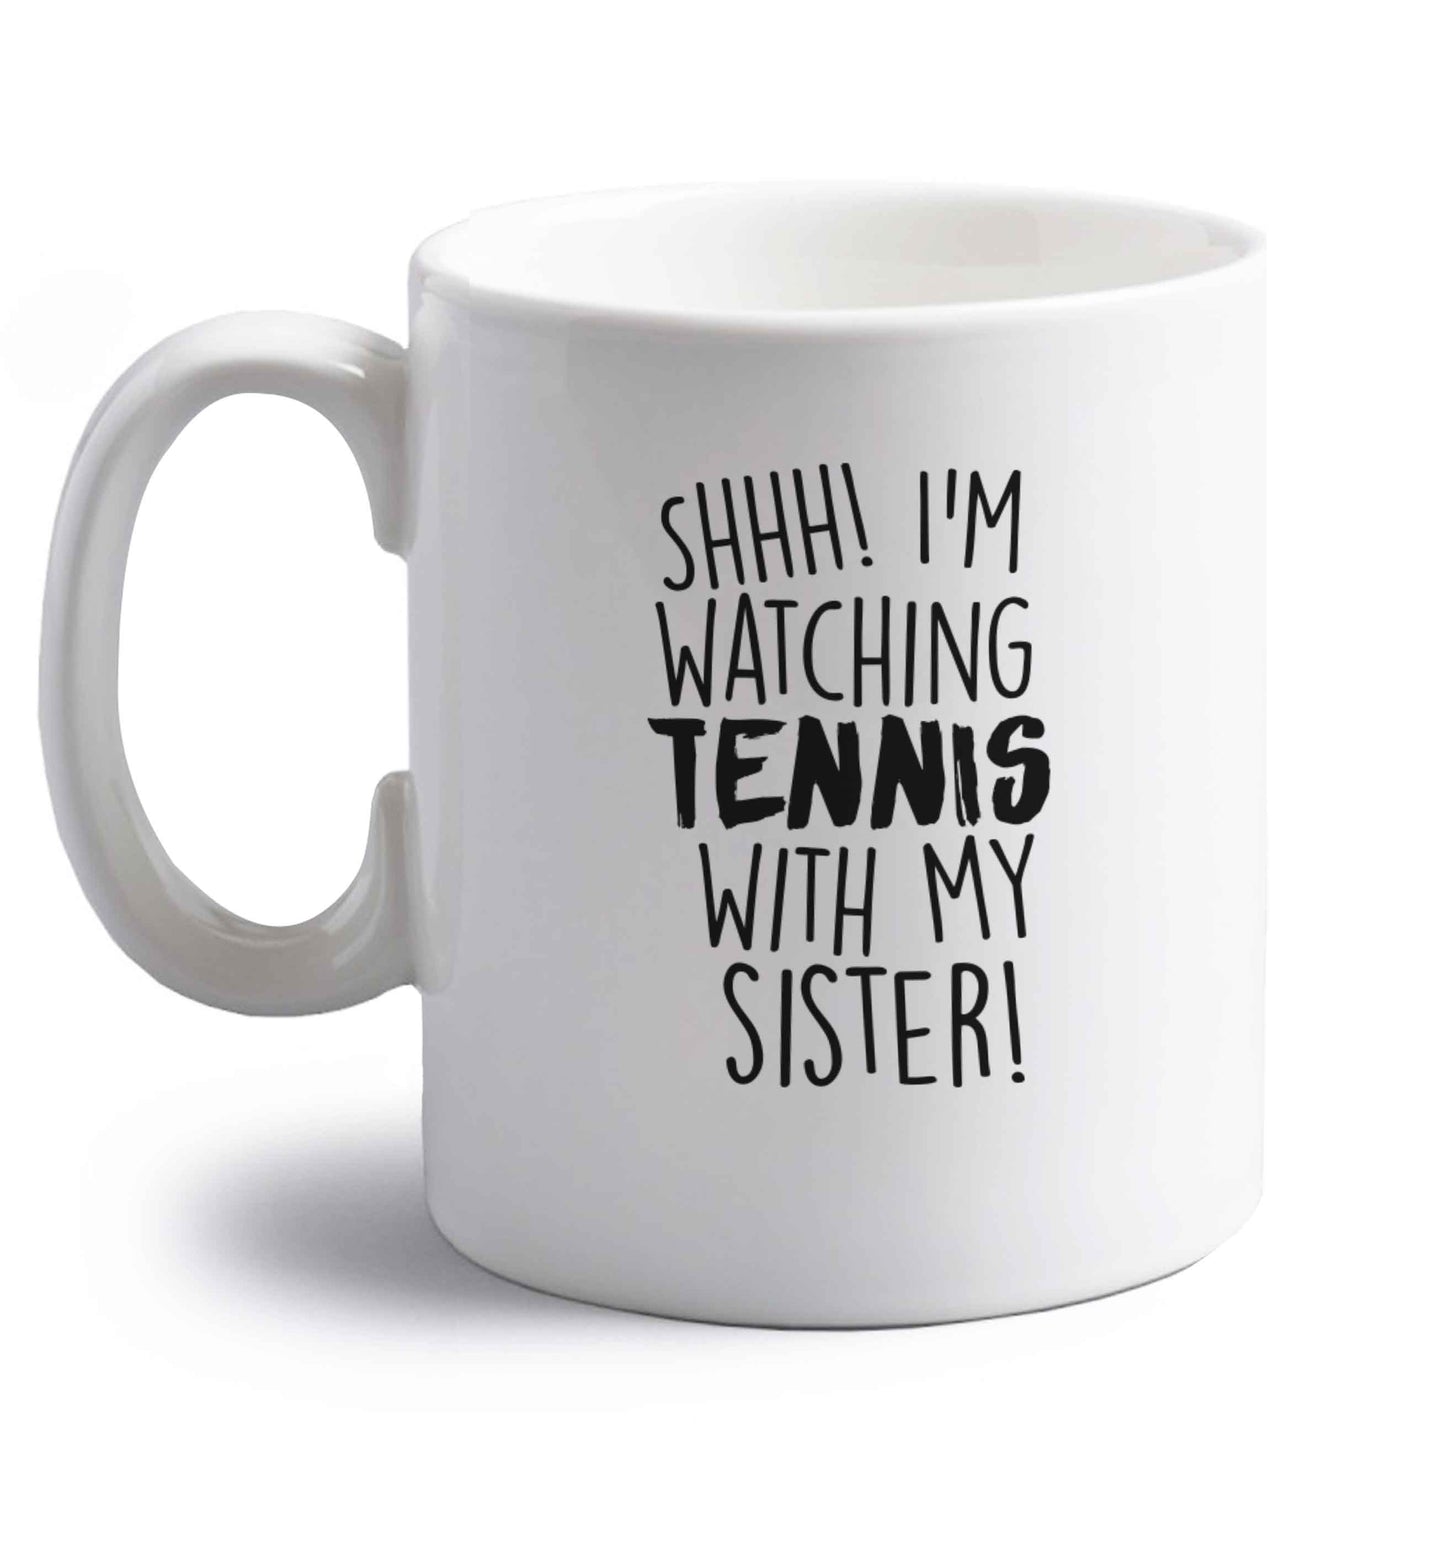 Shh! I'm watching tennis with my sister! right handed white ceramic mug 